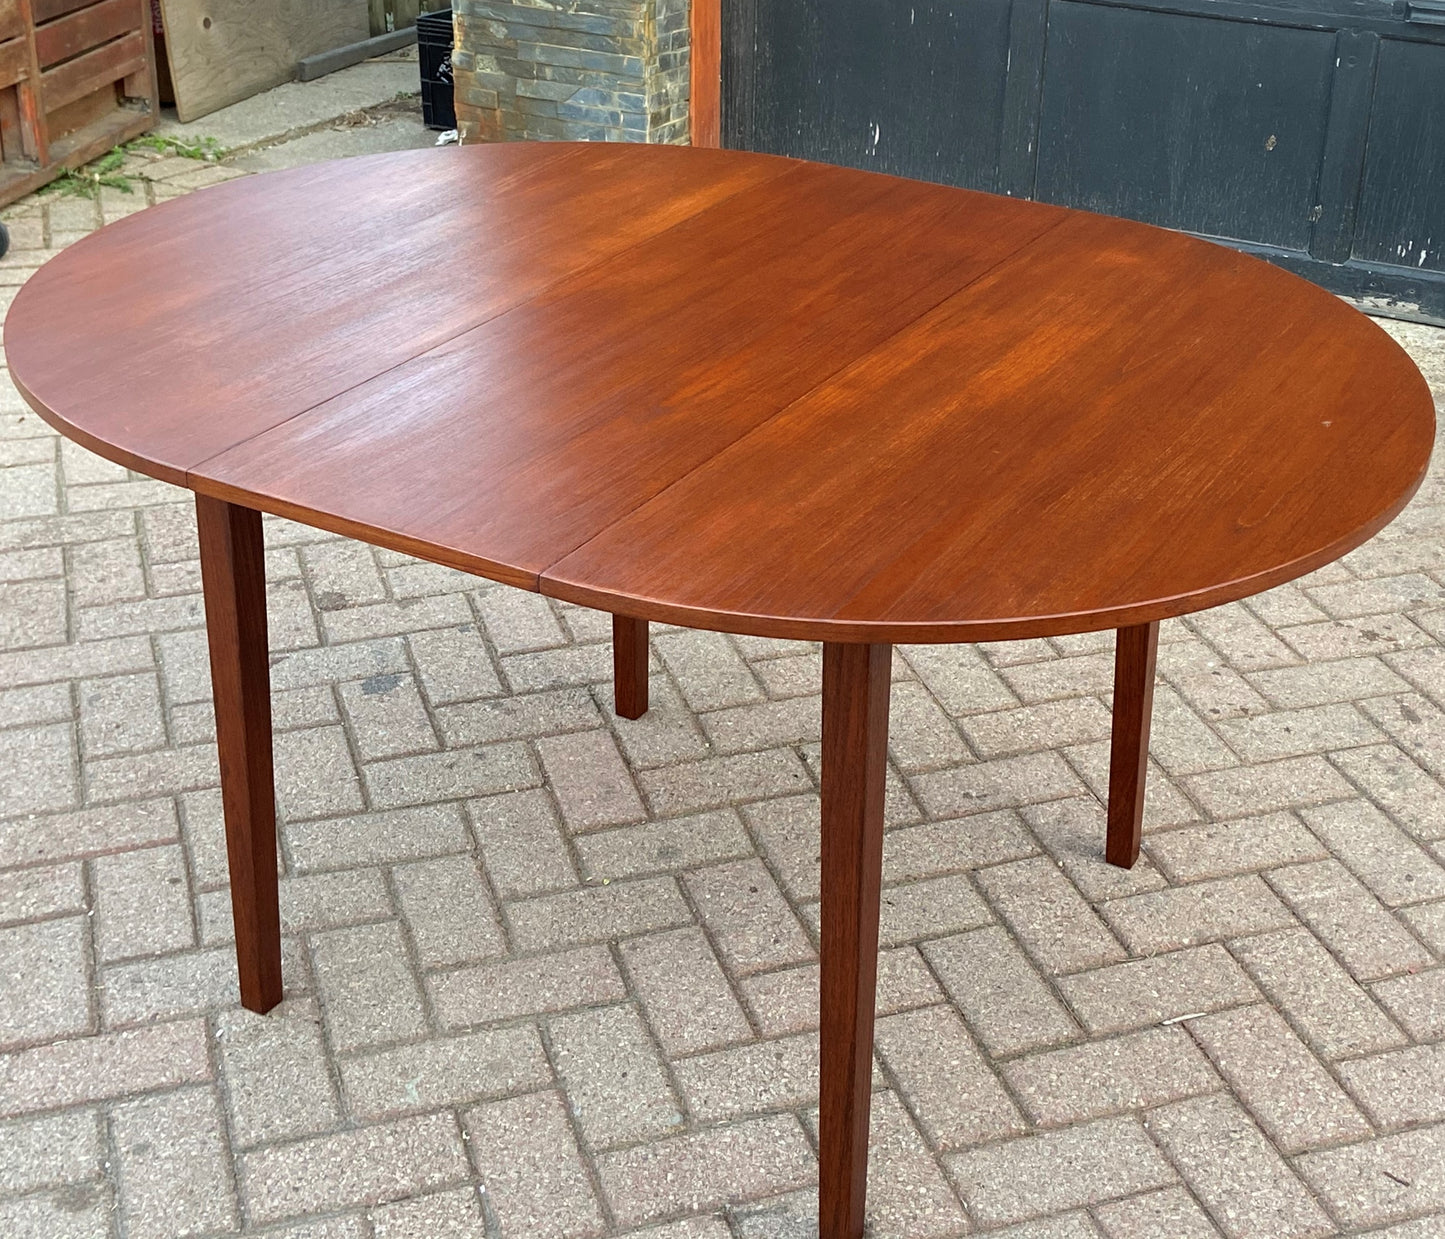 REFINISHED MCM Teak Table Round to Oval w 1 Leaf 42-56"